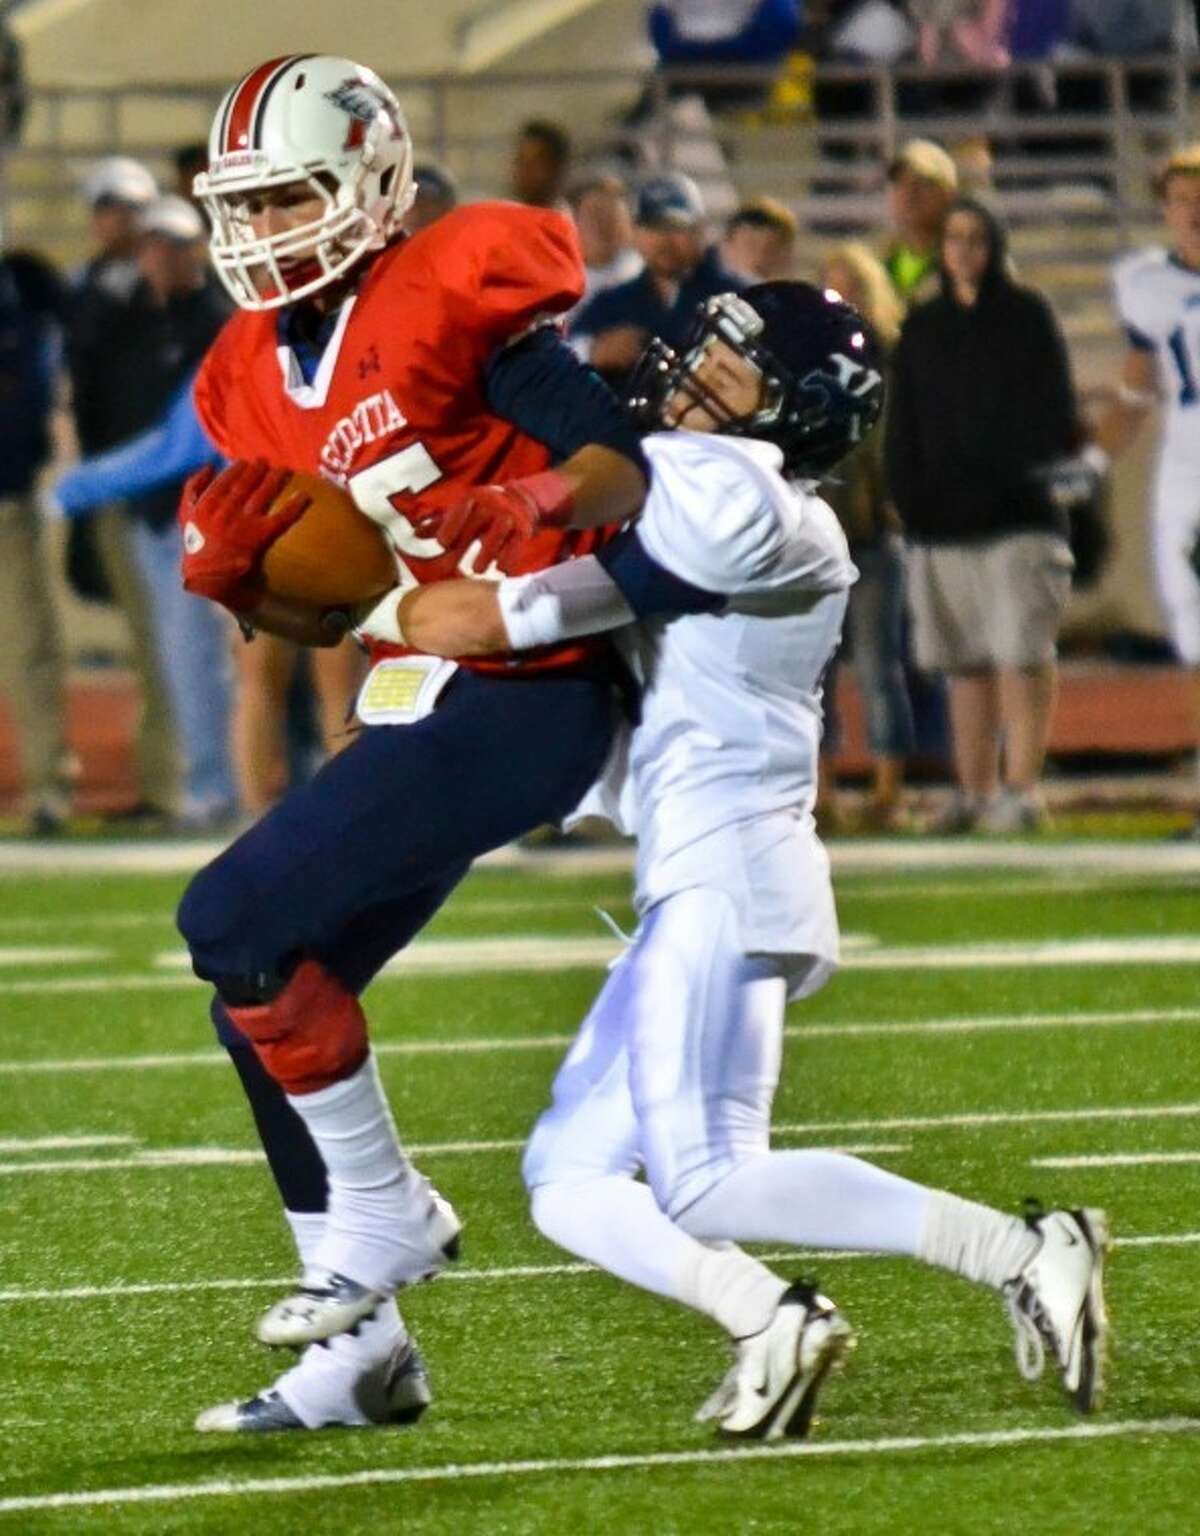 Travis Jones catches a pass during the second quarter of Atascocita's 38-27 loss to Kingwood Oct. 26.